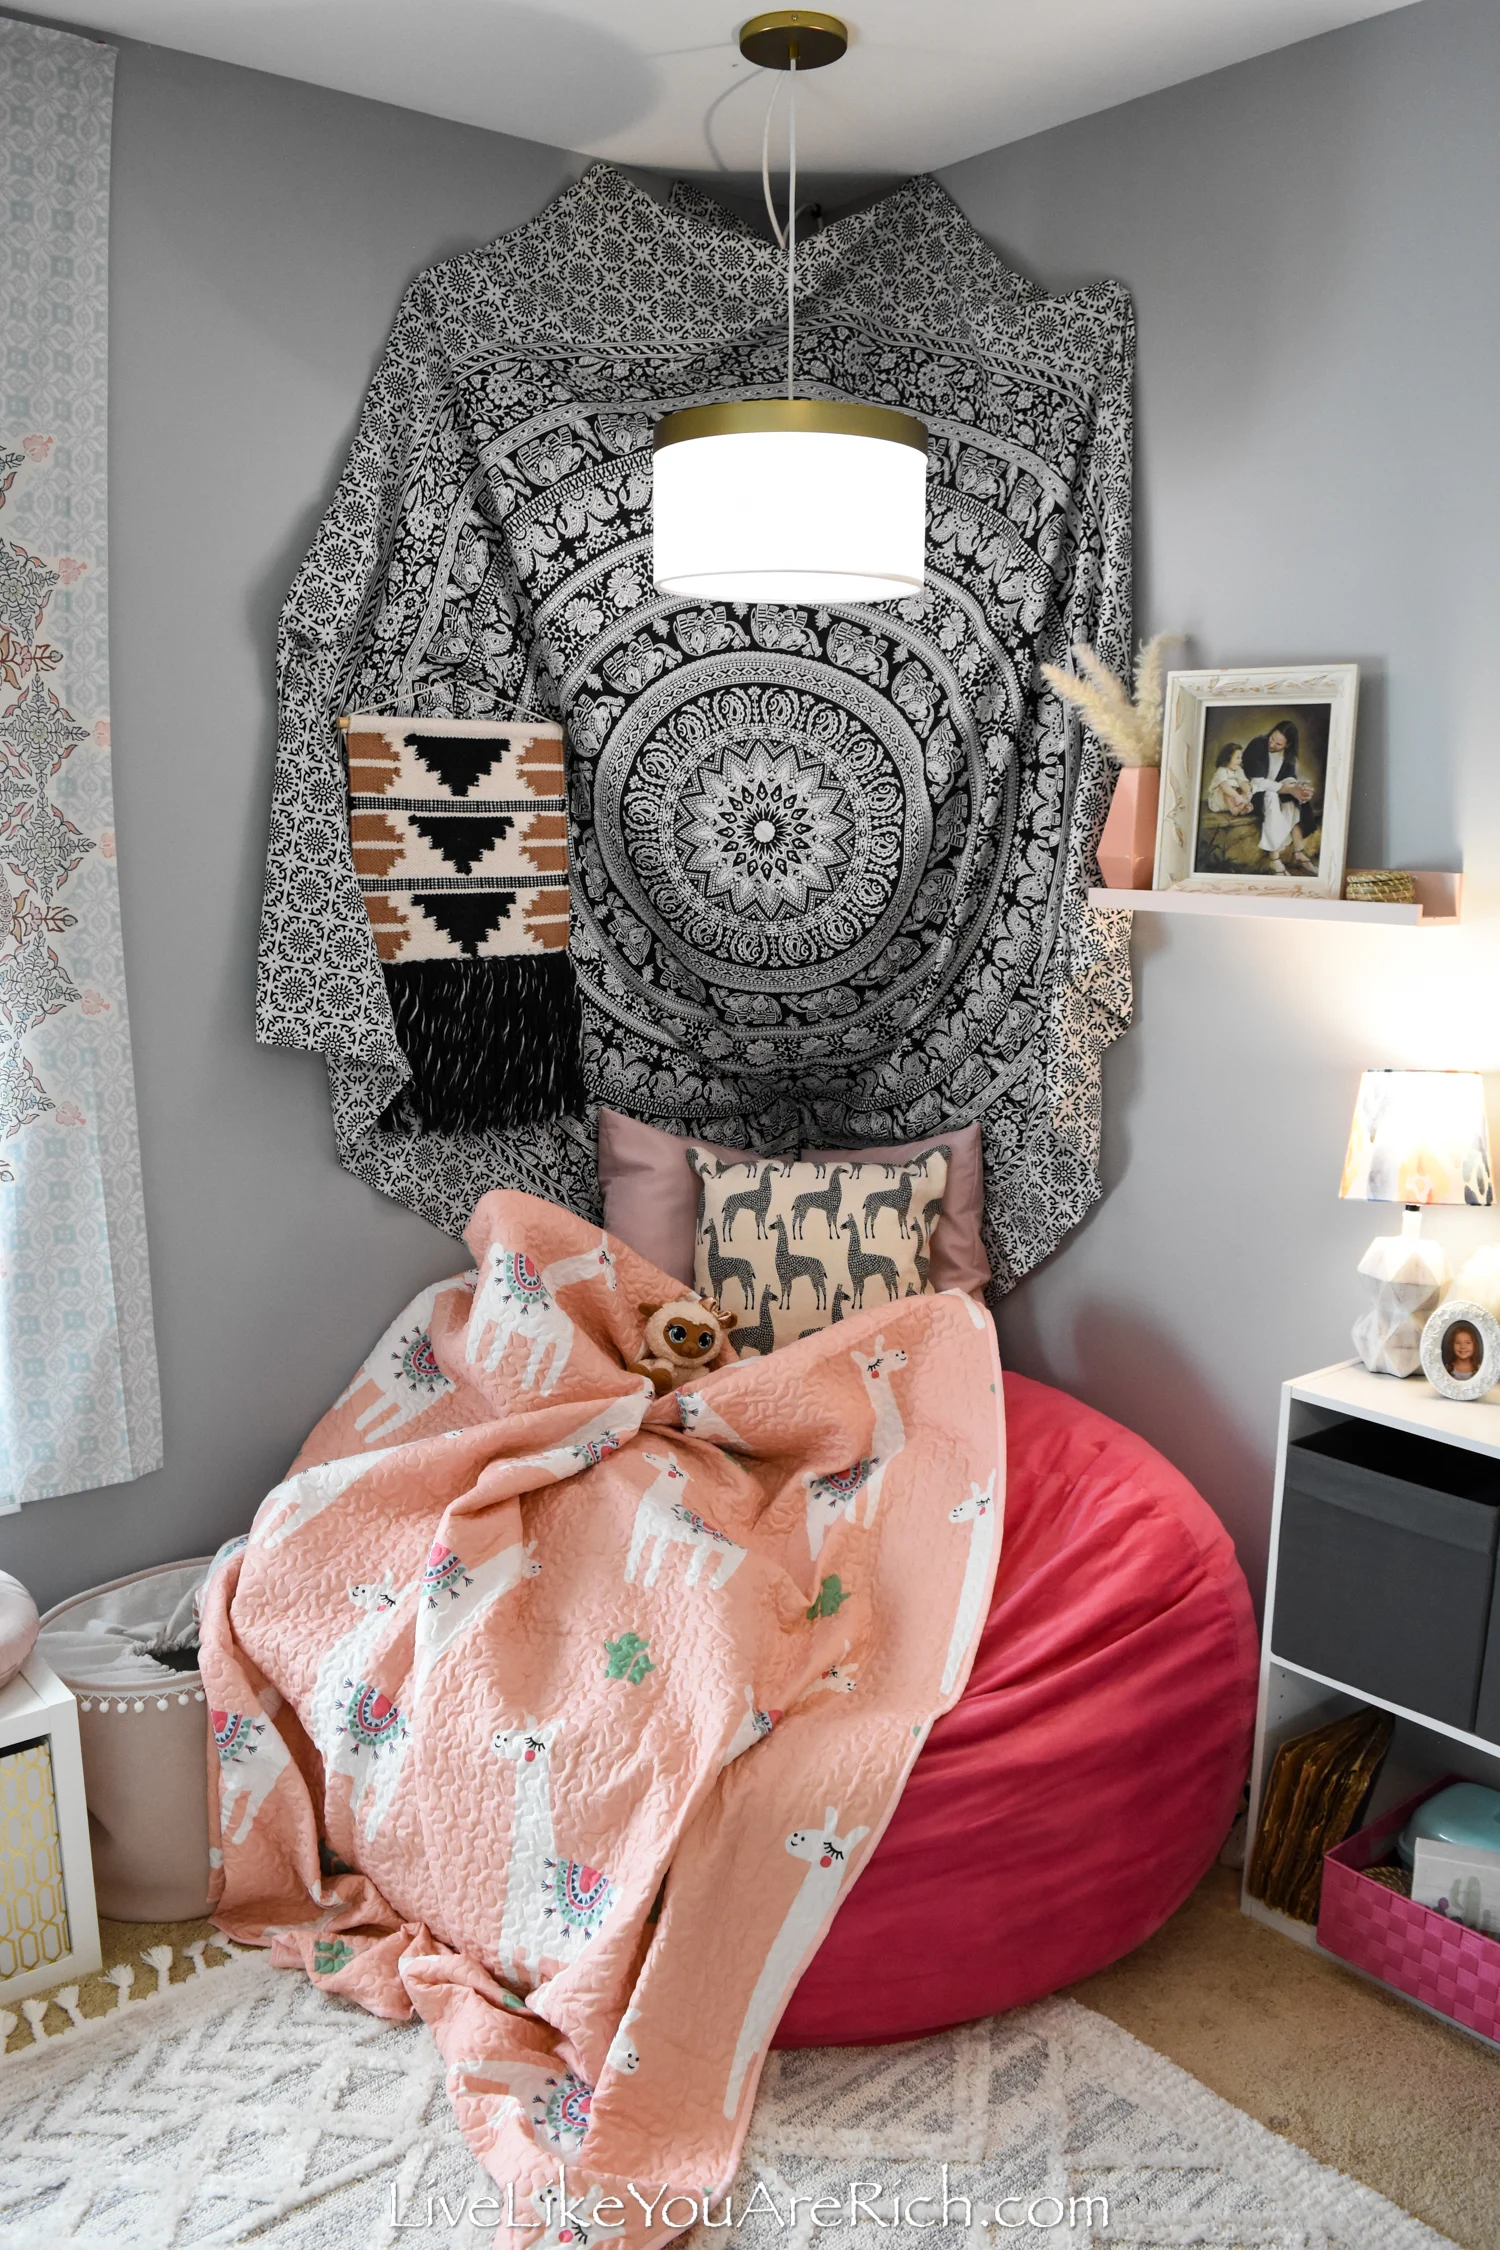 Colorful Bohemian Chic Girls' Bedroom